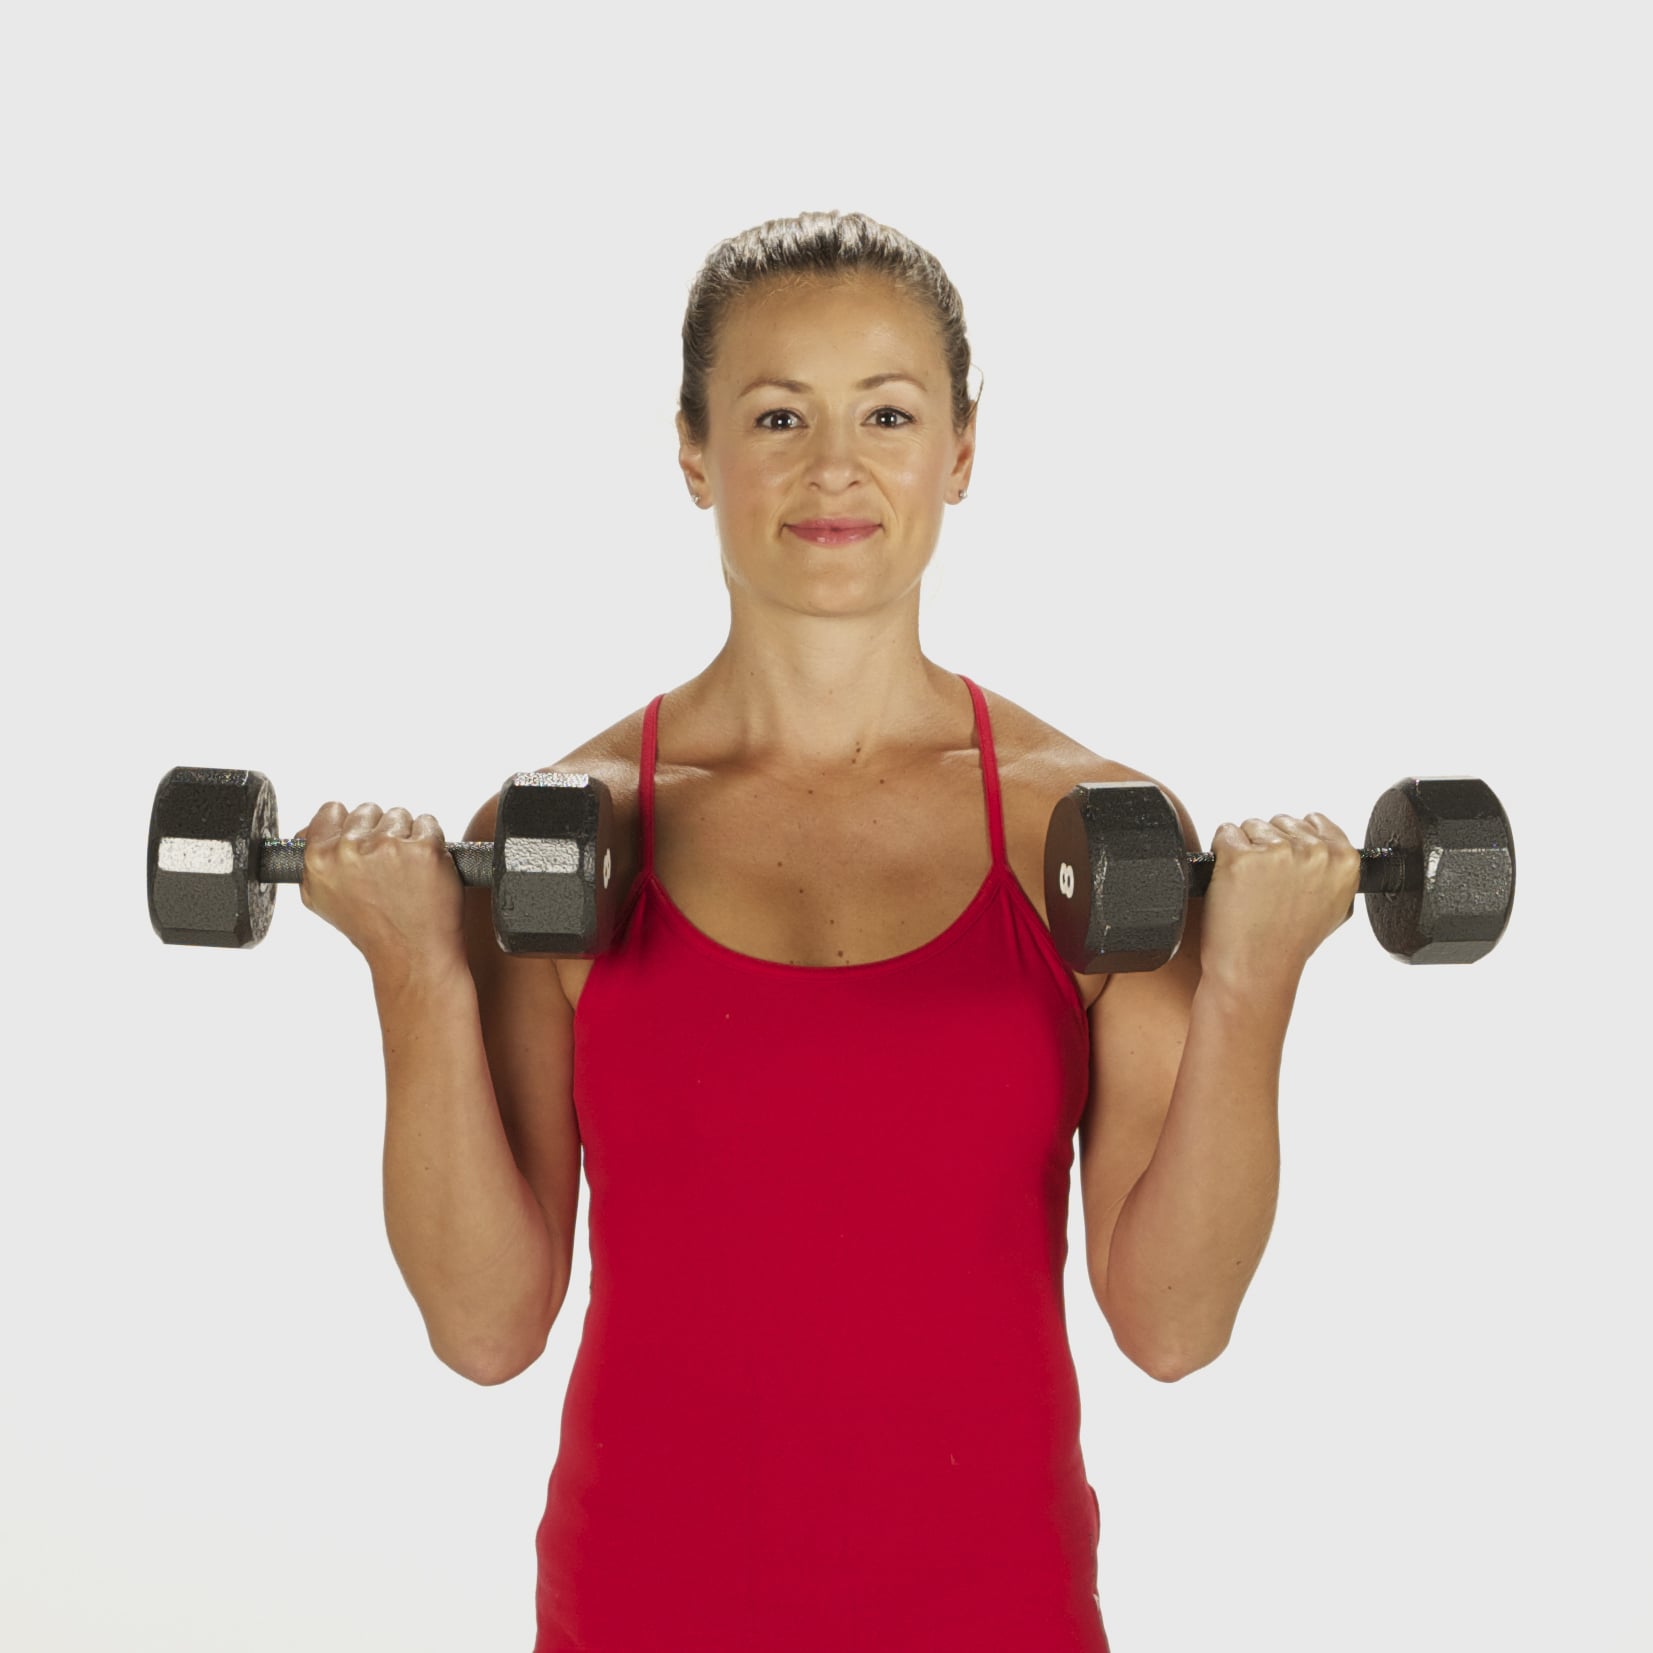 10-Minute Arm Workout Video